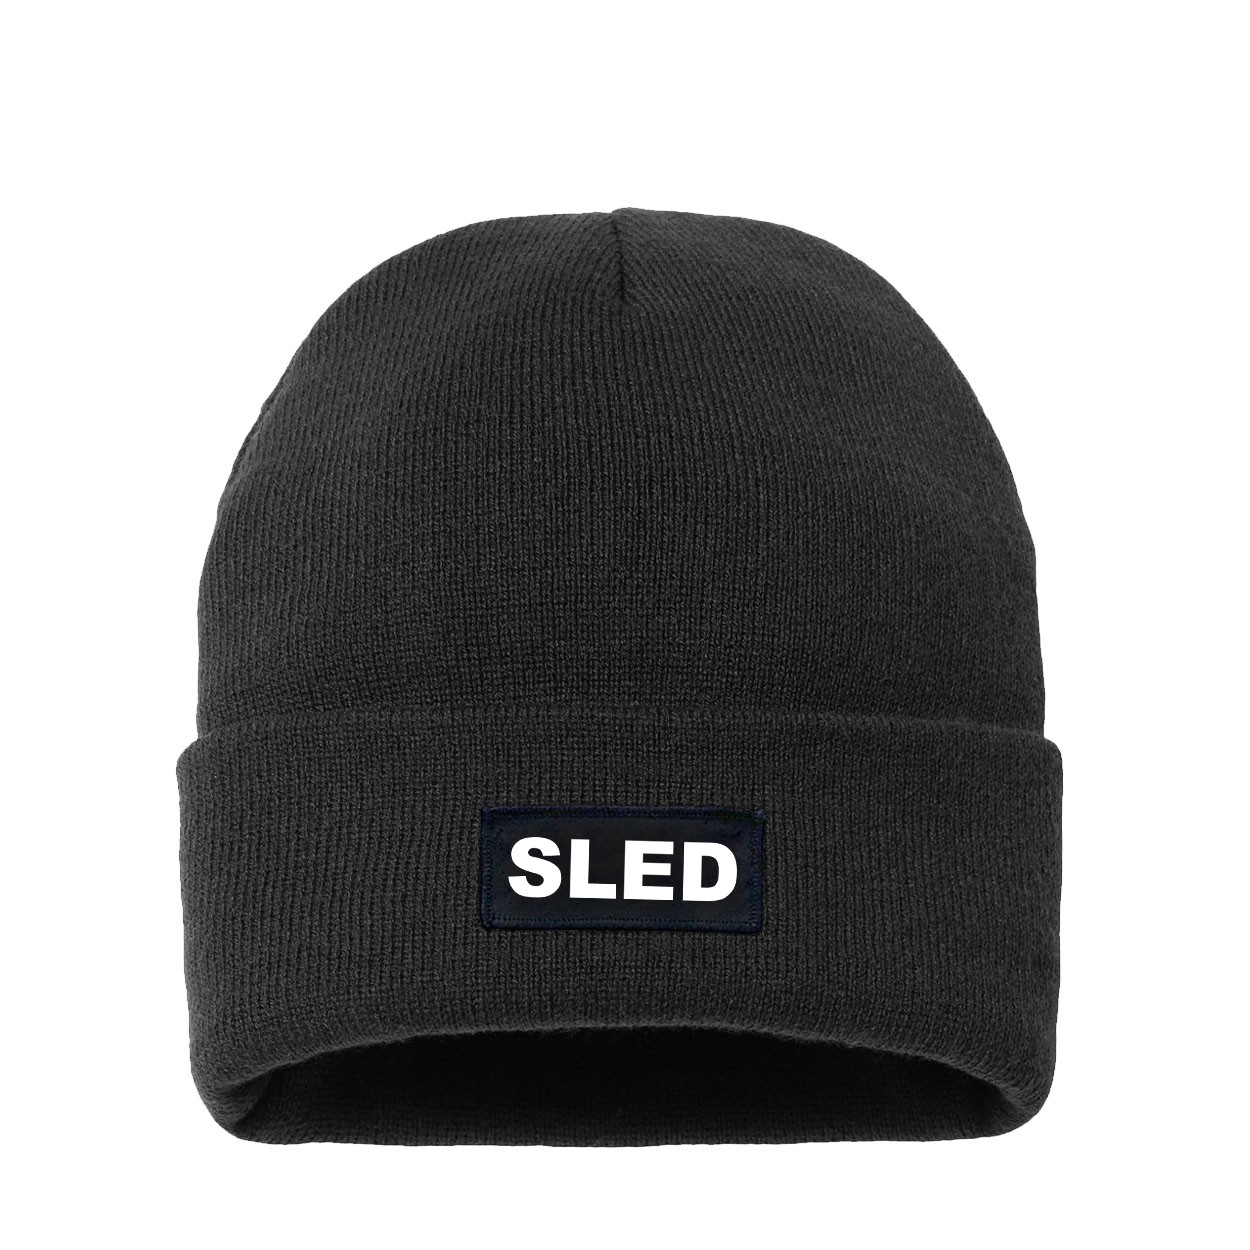 Sled Brand Logo Night Out Woven Patch Night Out Sherpa Lined Cuffed Beanie Black